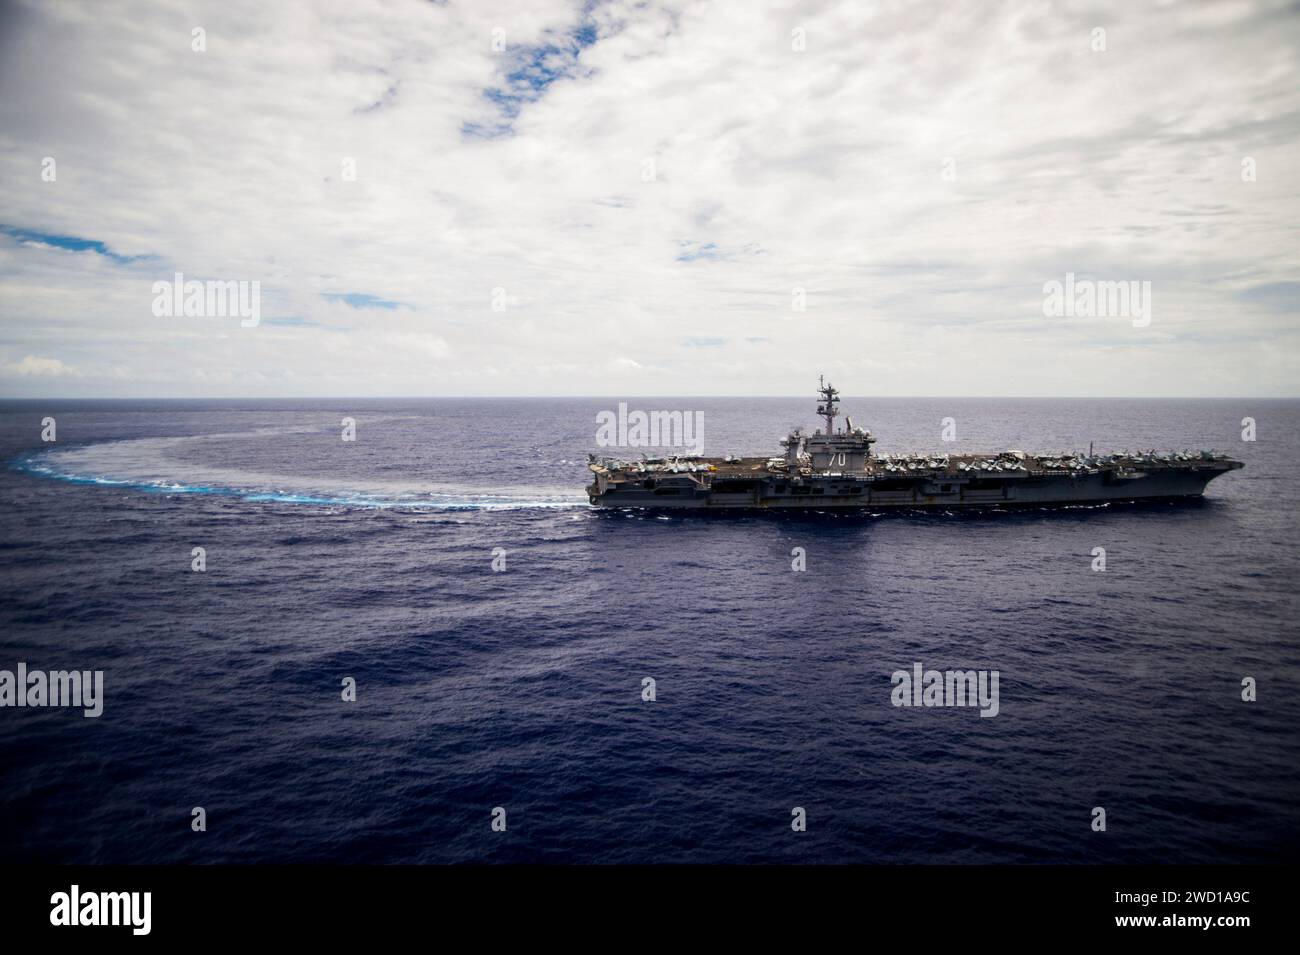 The aircraft carrier USS Carl Vinson transits the Pacific Ocean. Stock Photo